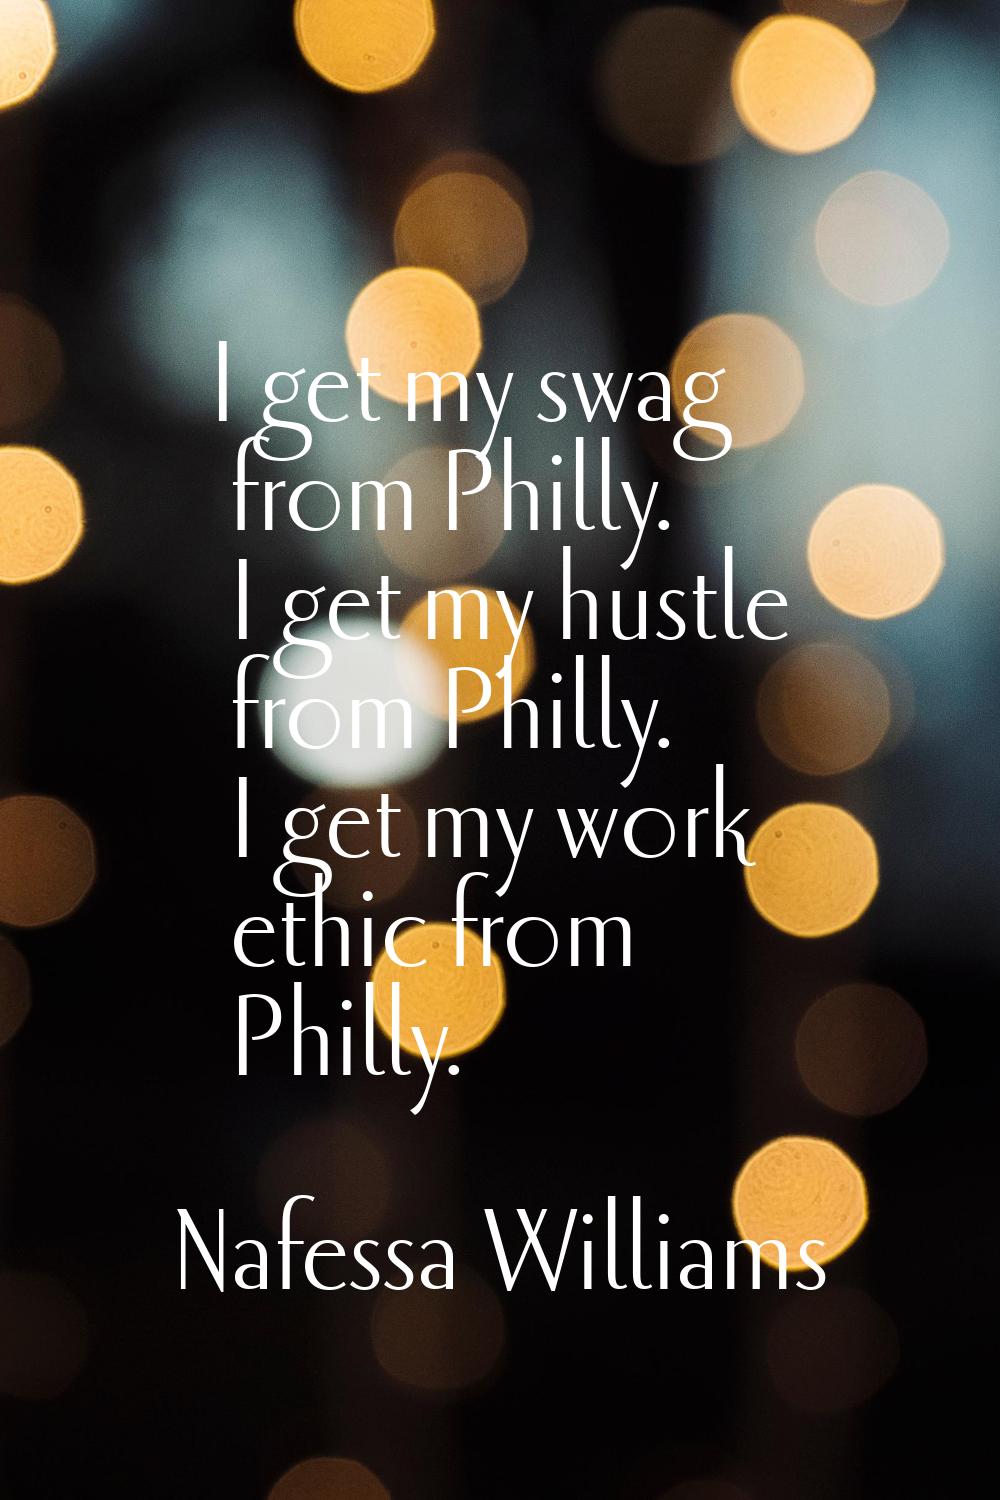 I get my swag from Philly. I get my hustle from Philly. I get my work ethic from Philly.